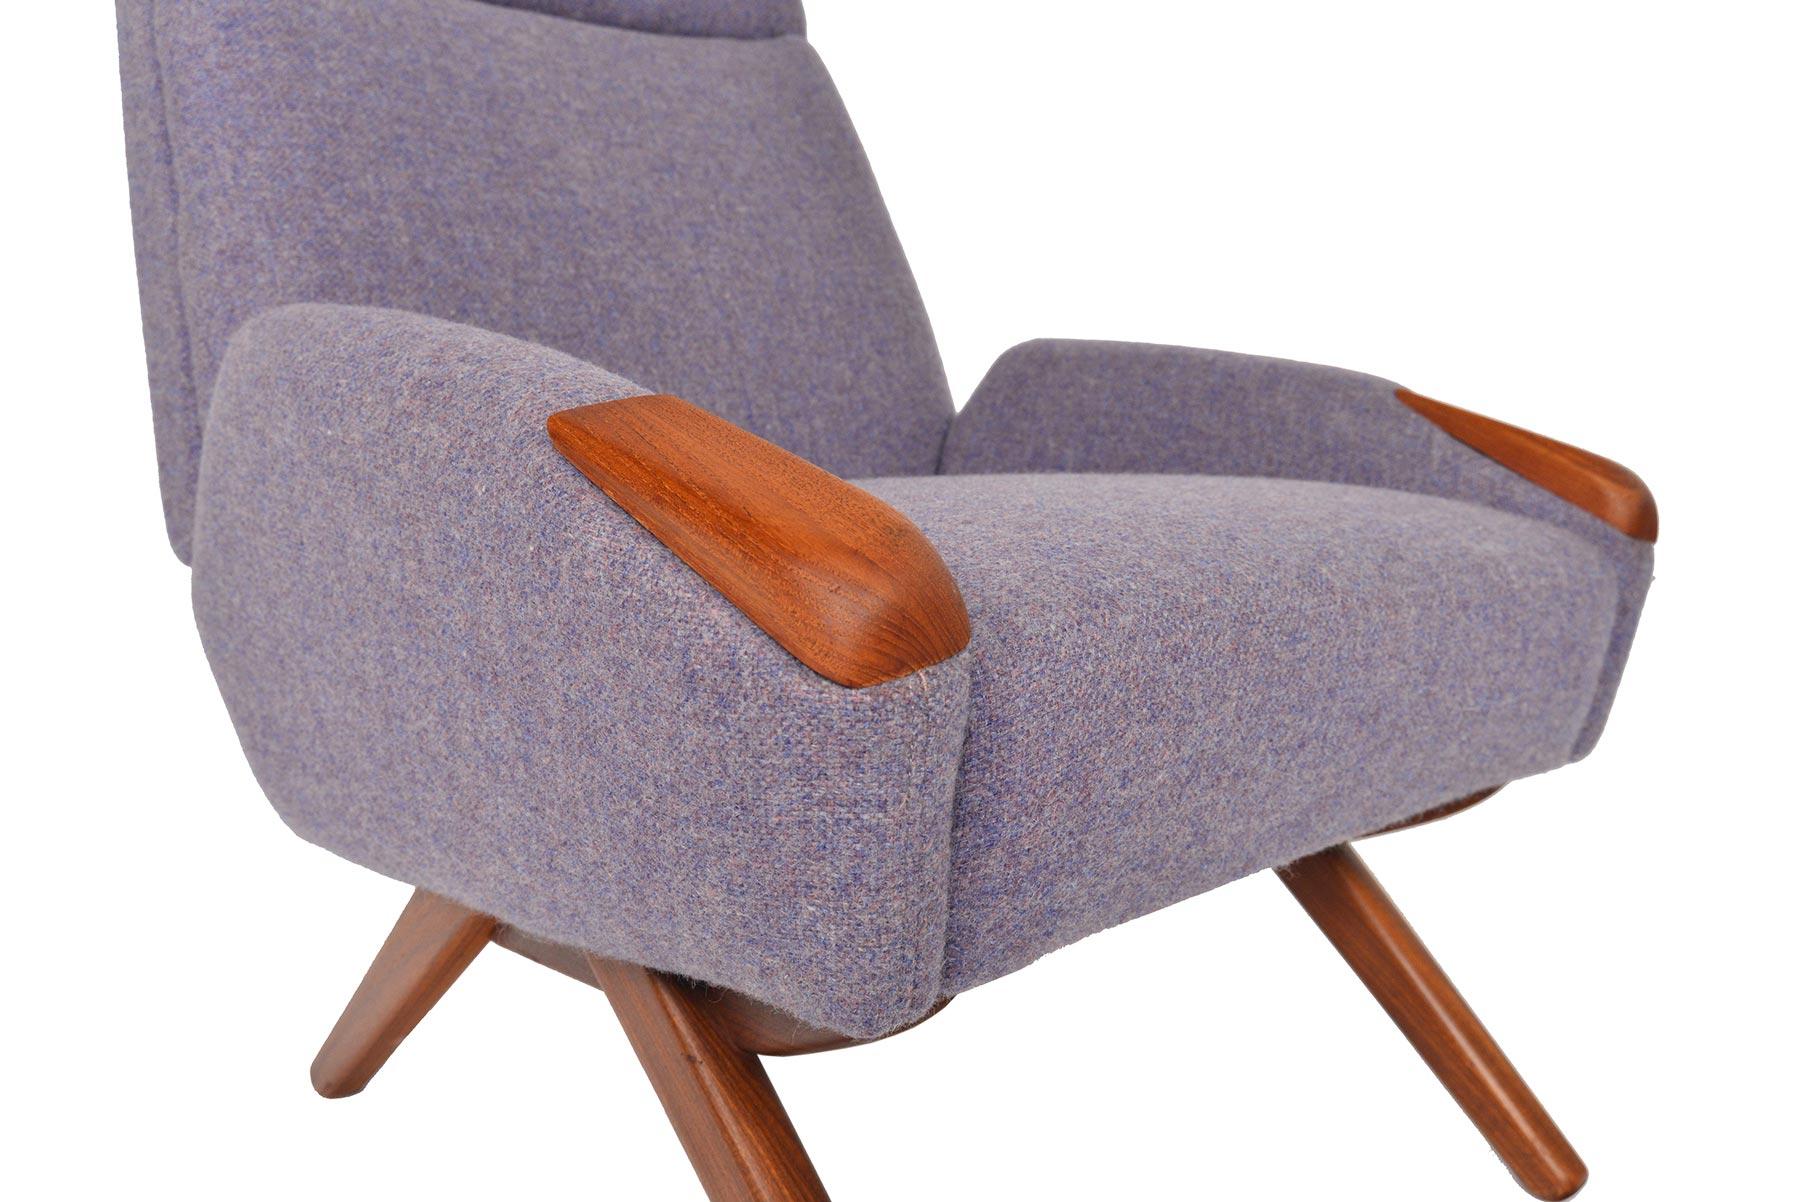 This Danish modern high back lounge chair features teak paws and a provocative canted leg base. Its tall, structural back not only creates a beautiful profile but offers back support and ergonomic comfortability. Chair wears a soft lavender wool